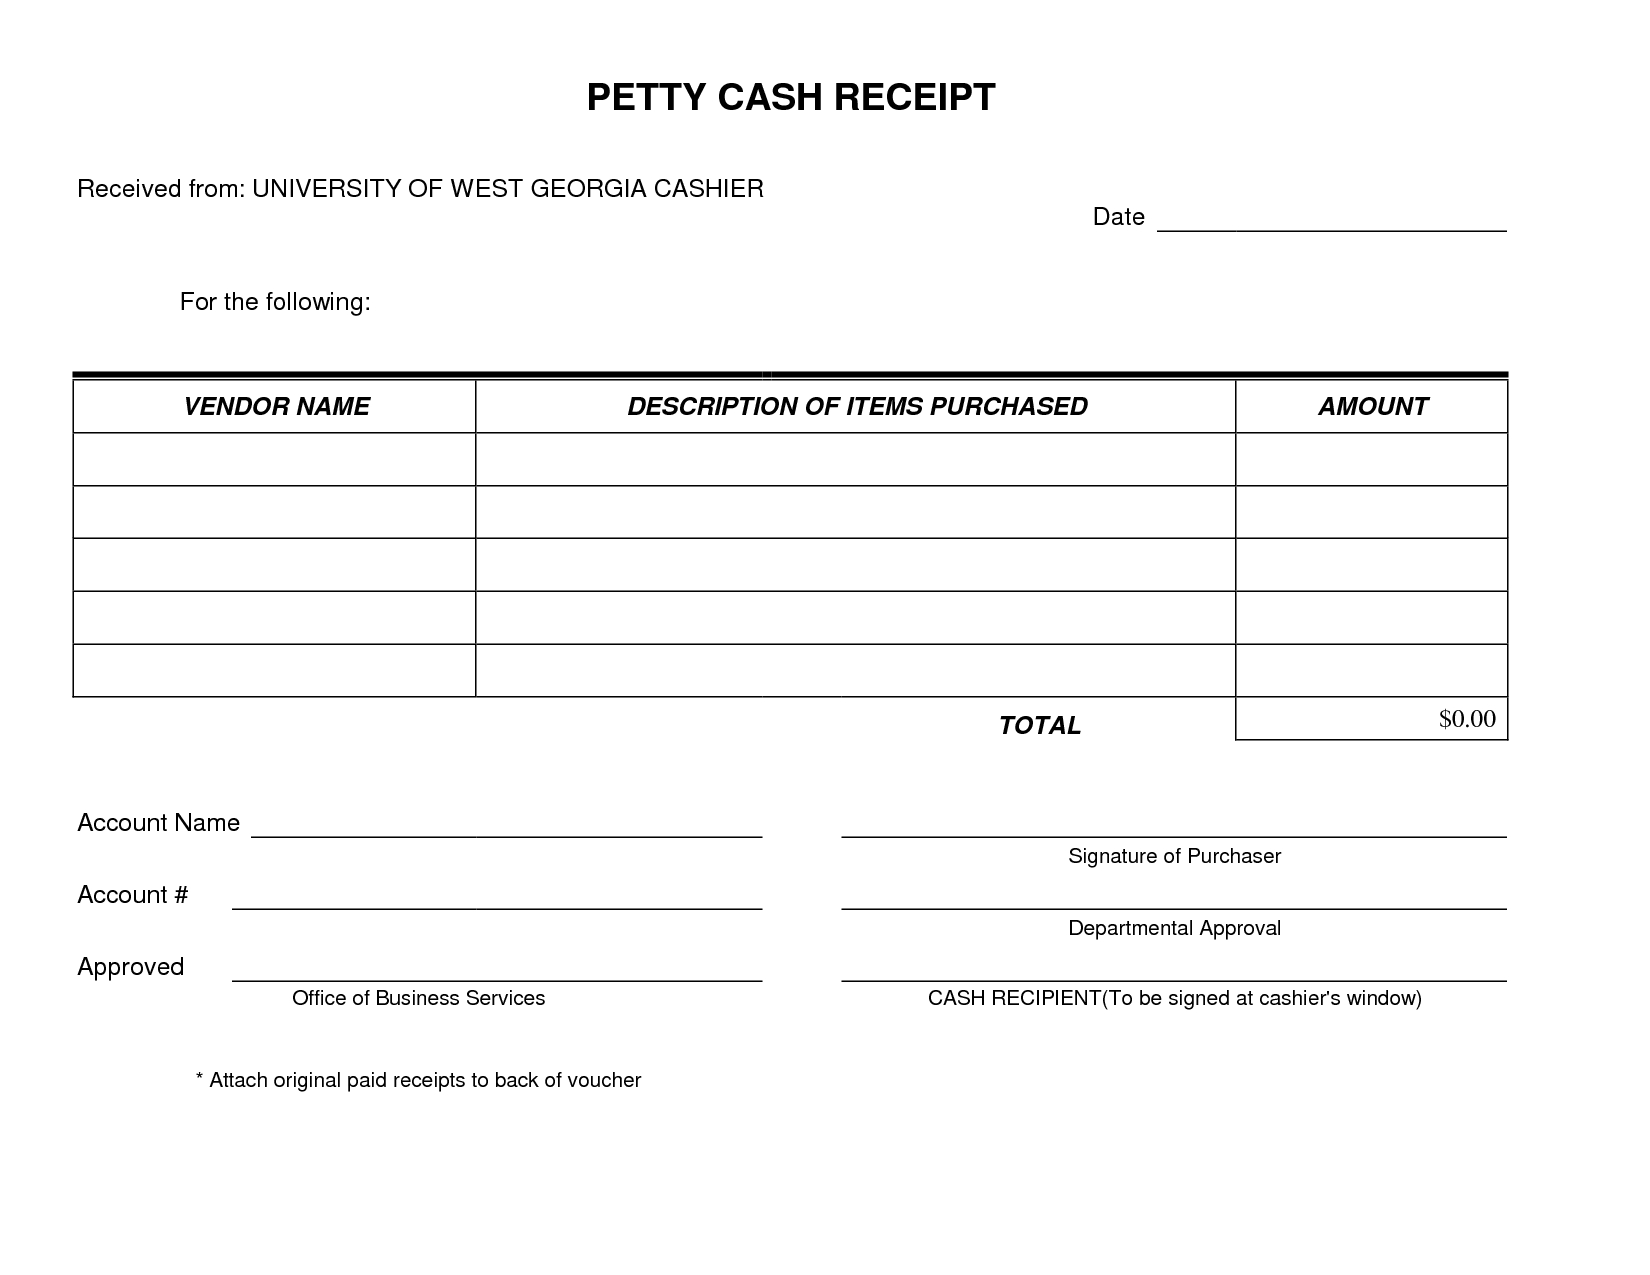 Petty Cash Receipt Form Template Very Simple And Easy To Print. I - Free Printable Petty Cash Voucher